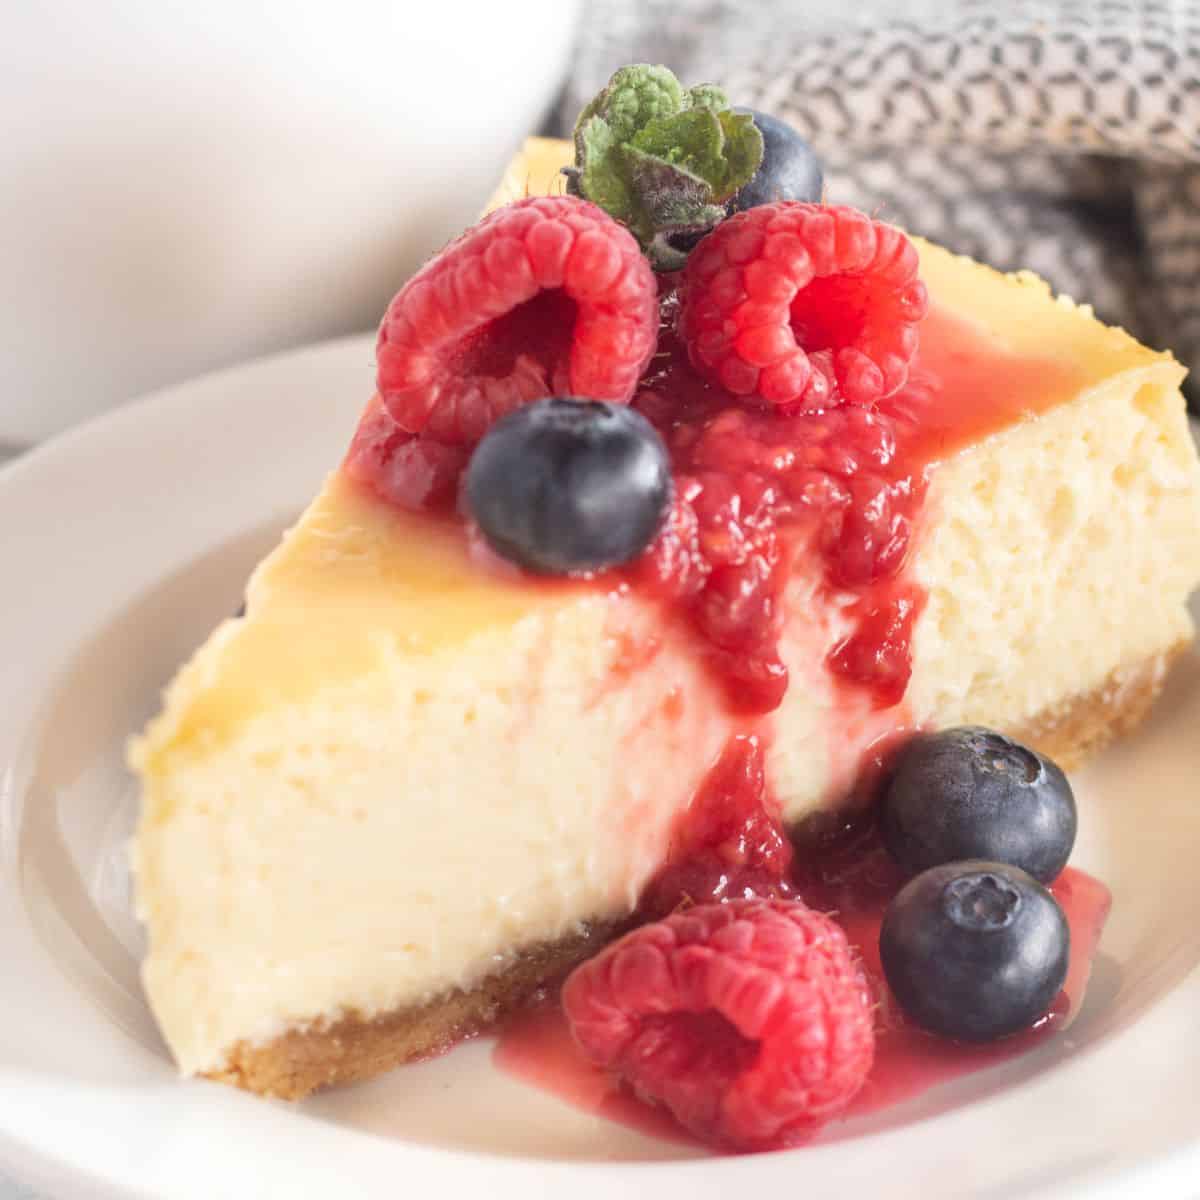 square image of a slice of cheesecake with berries.